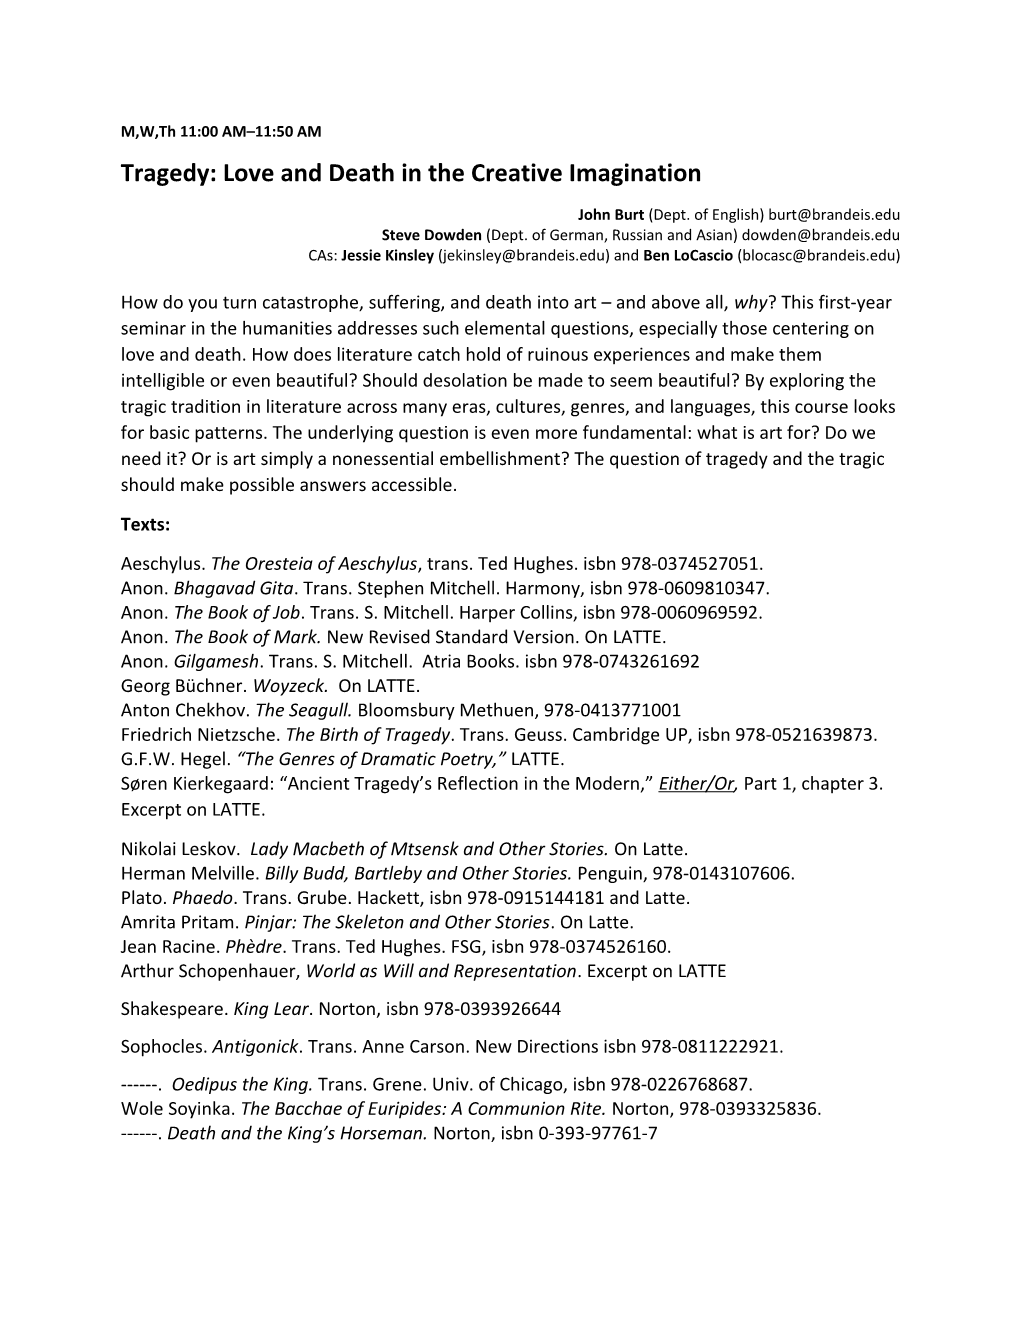 Tragedy: Love and Death in the Creative Imagination